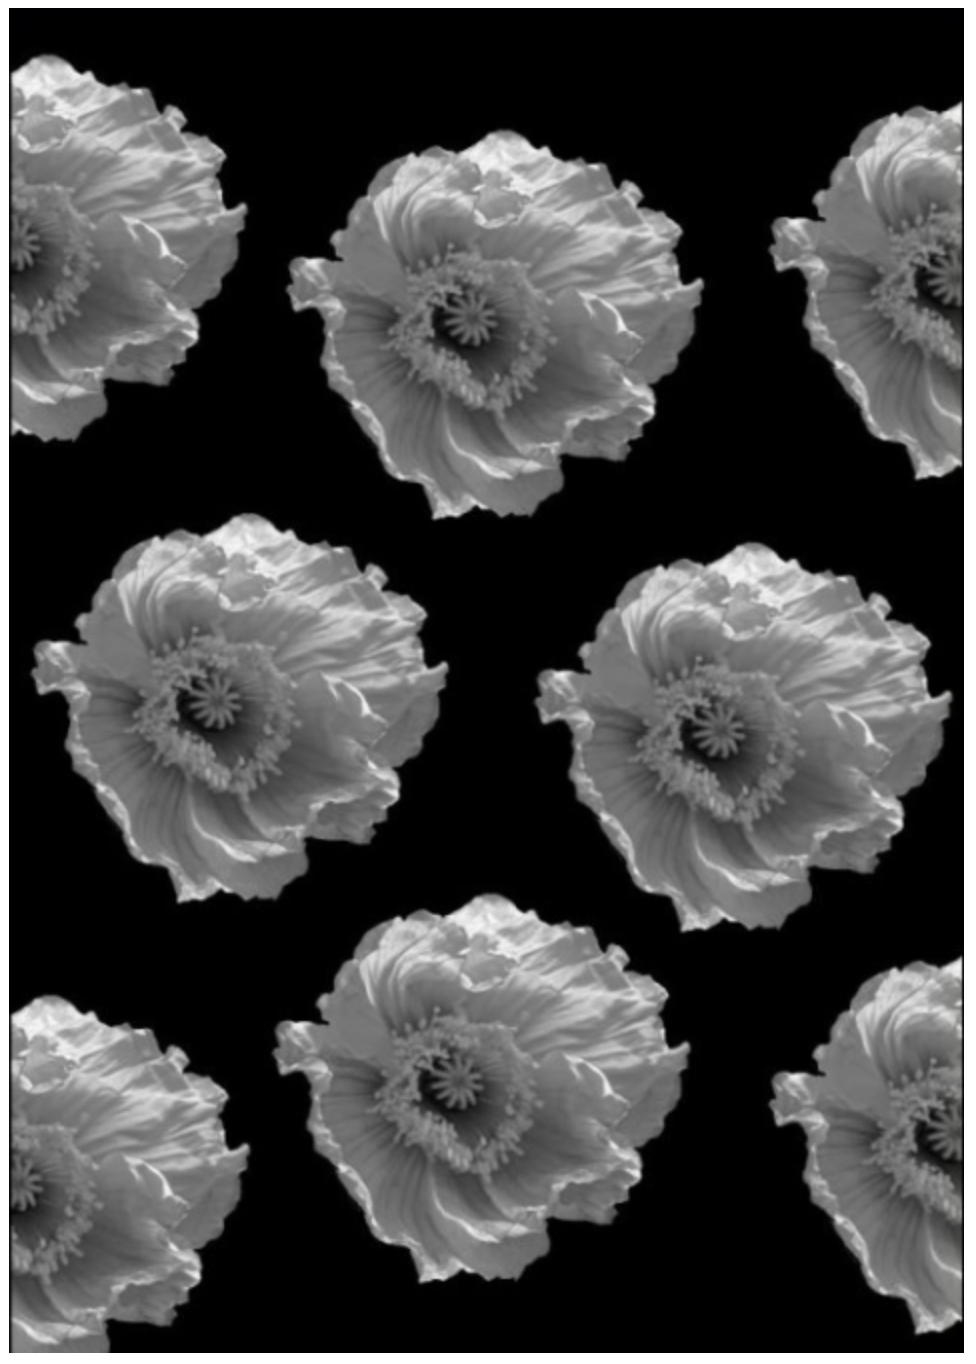 NEW B&W POPPIES - Wrapping Paper - Set of 3 Sheets